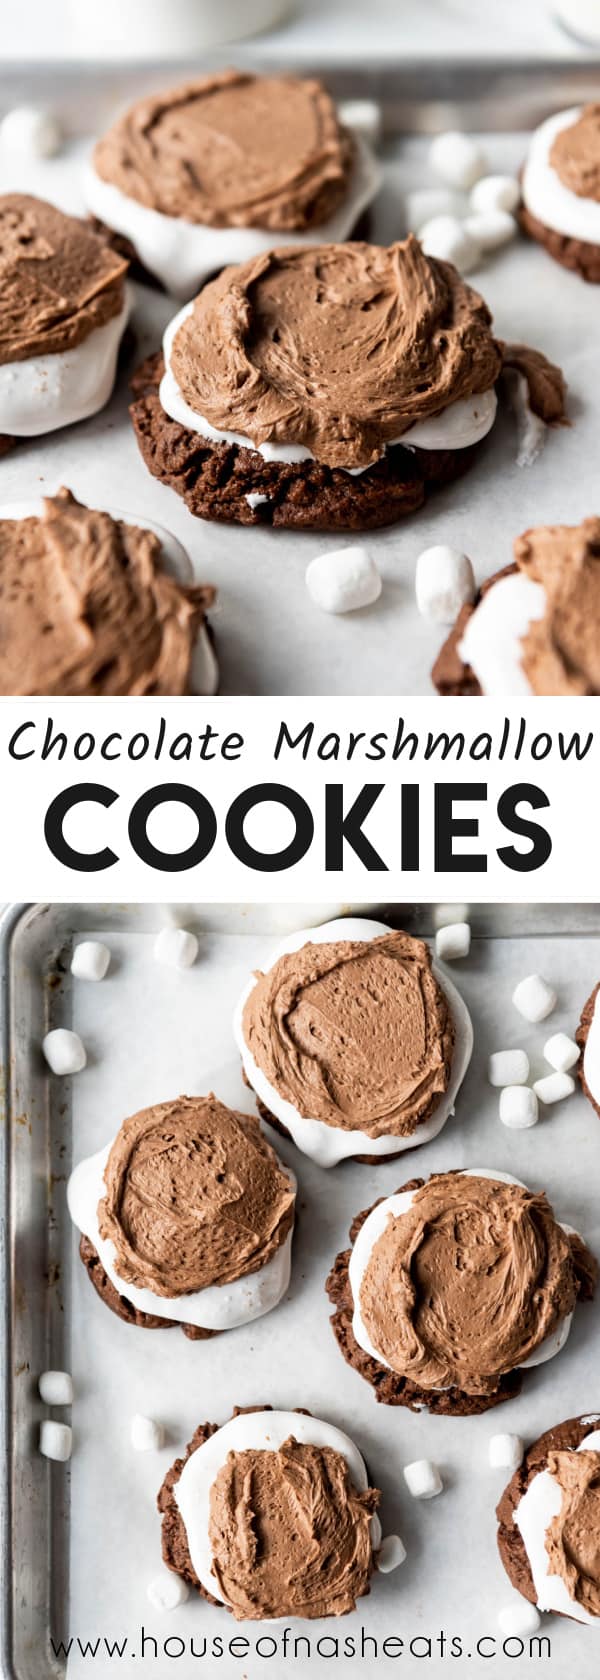 A collage of images of chocolate marshmallow cookies with text overlay.